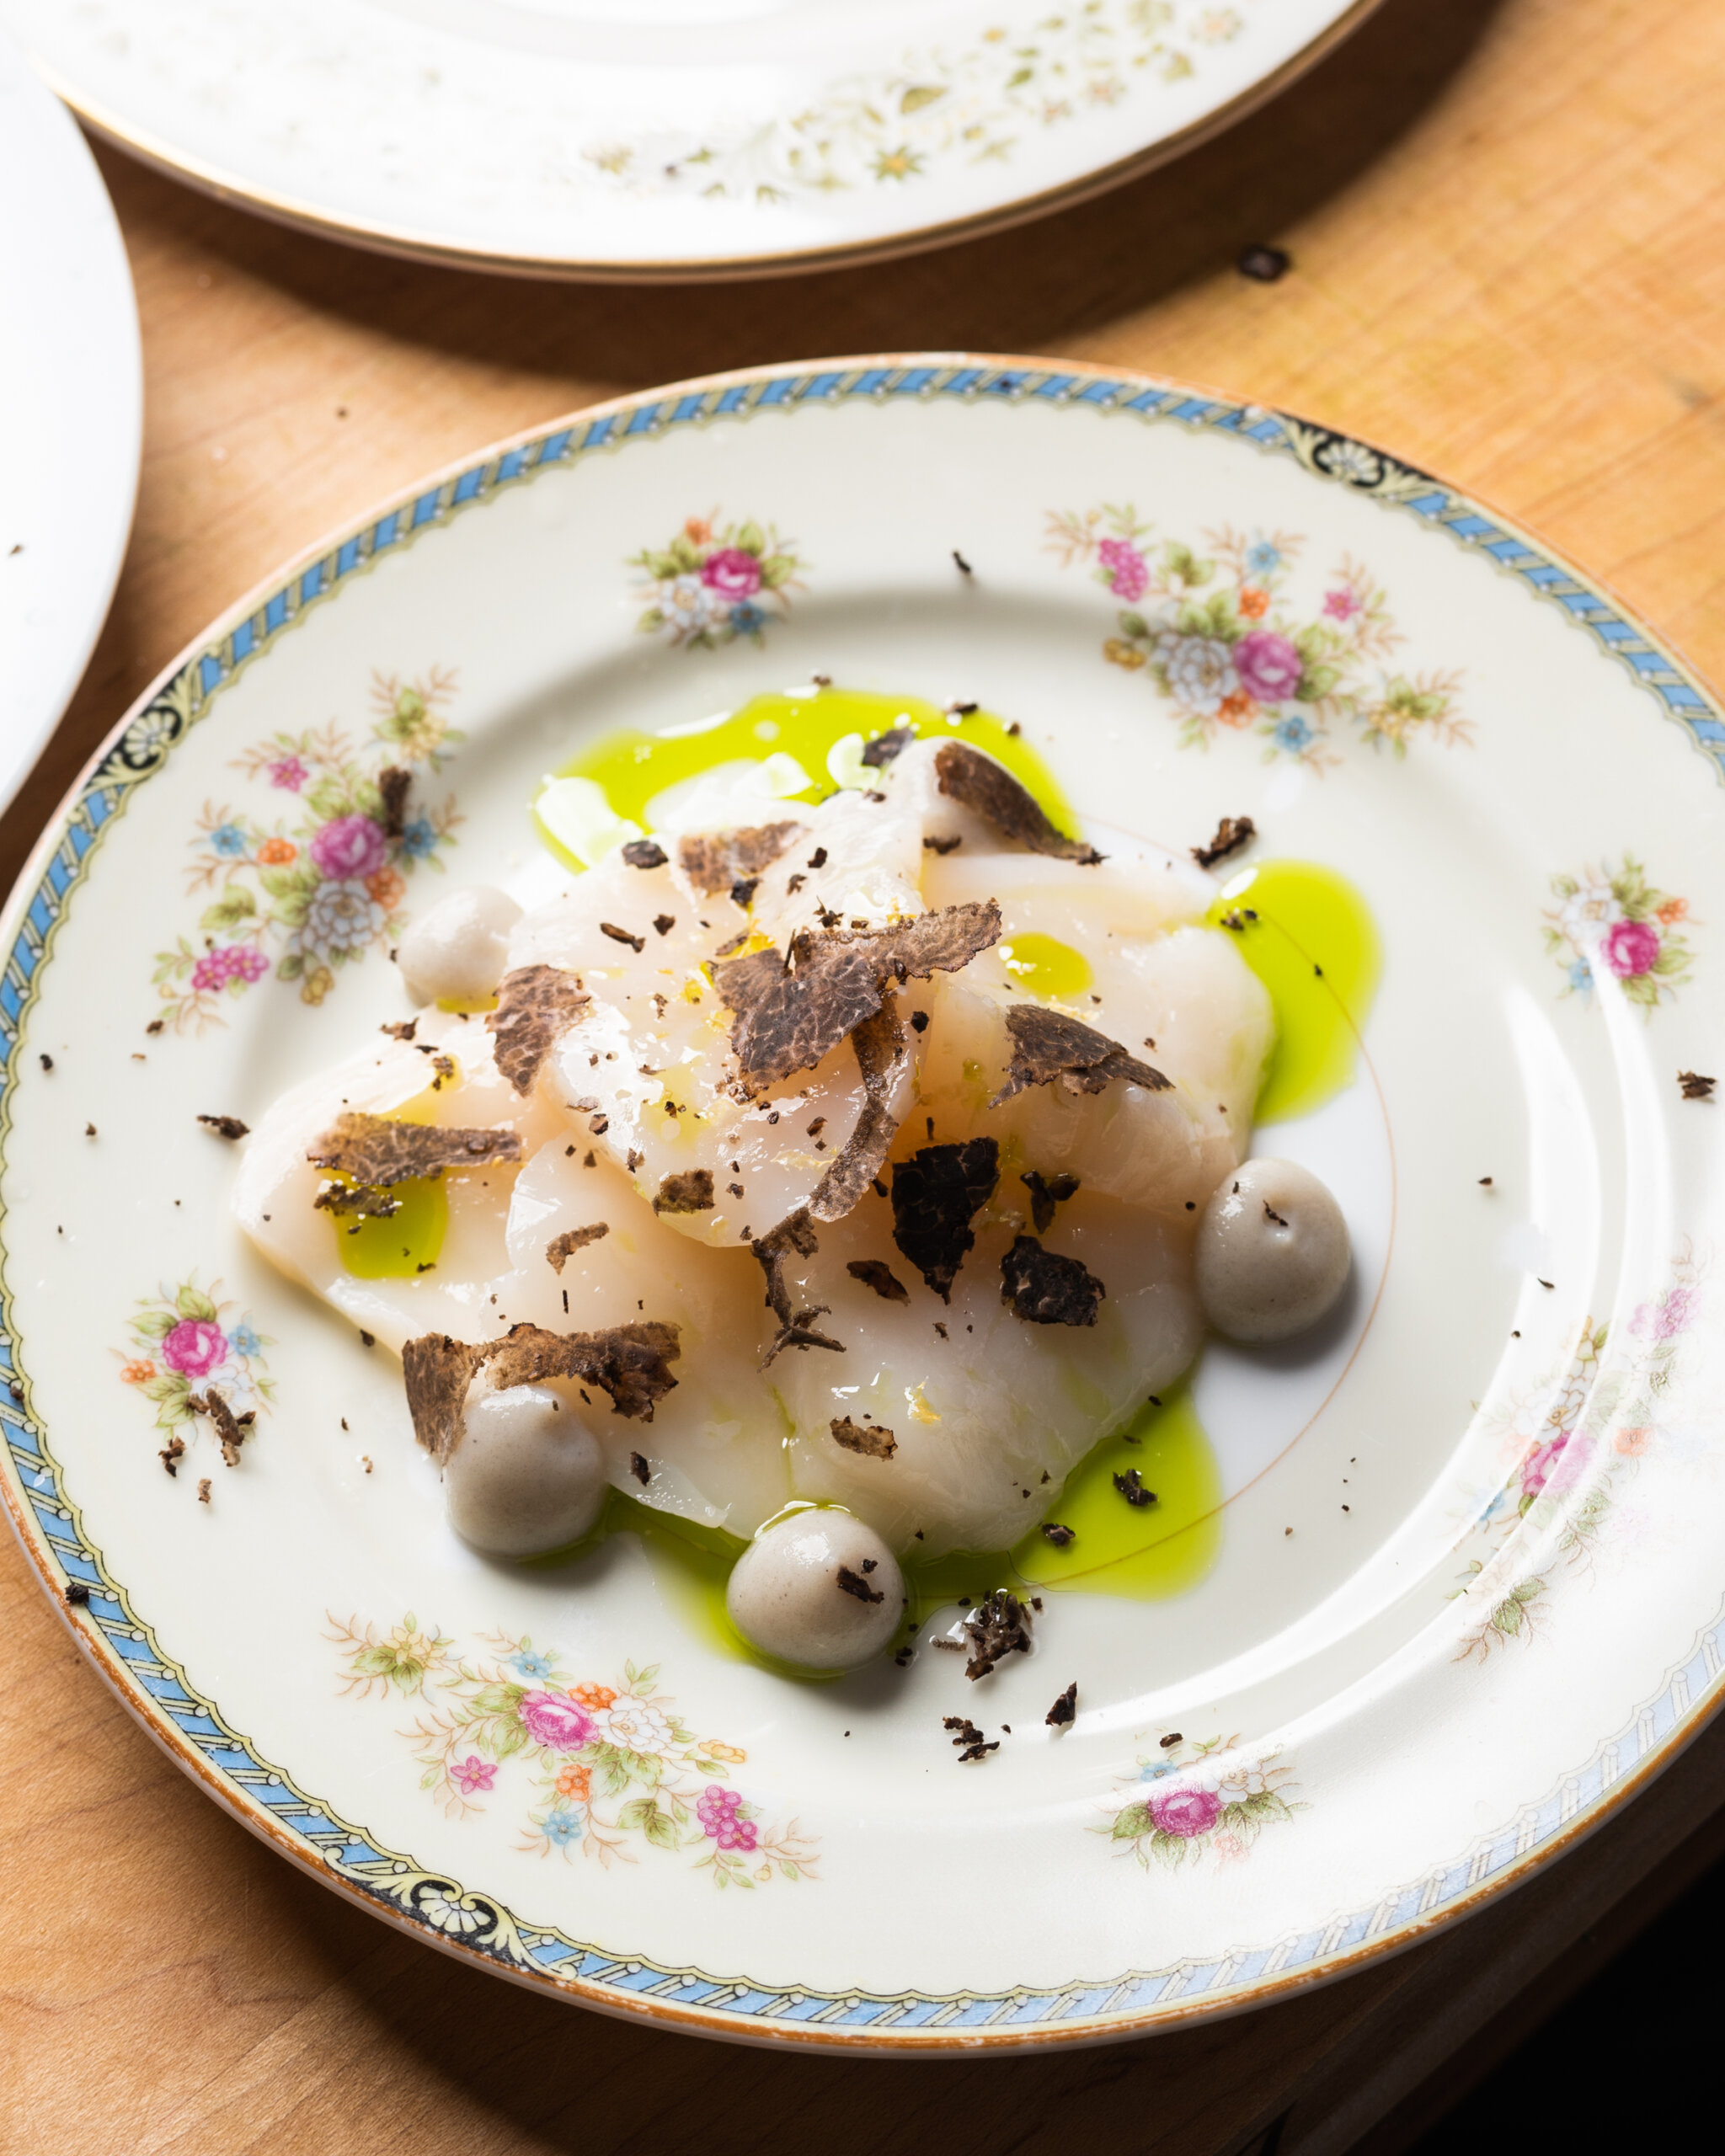 Scallop crudo with shaved truffles